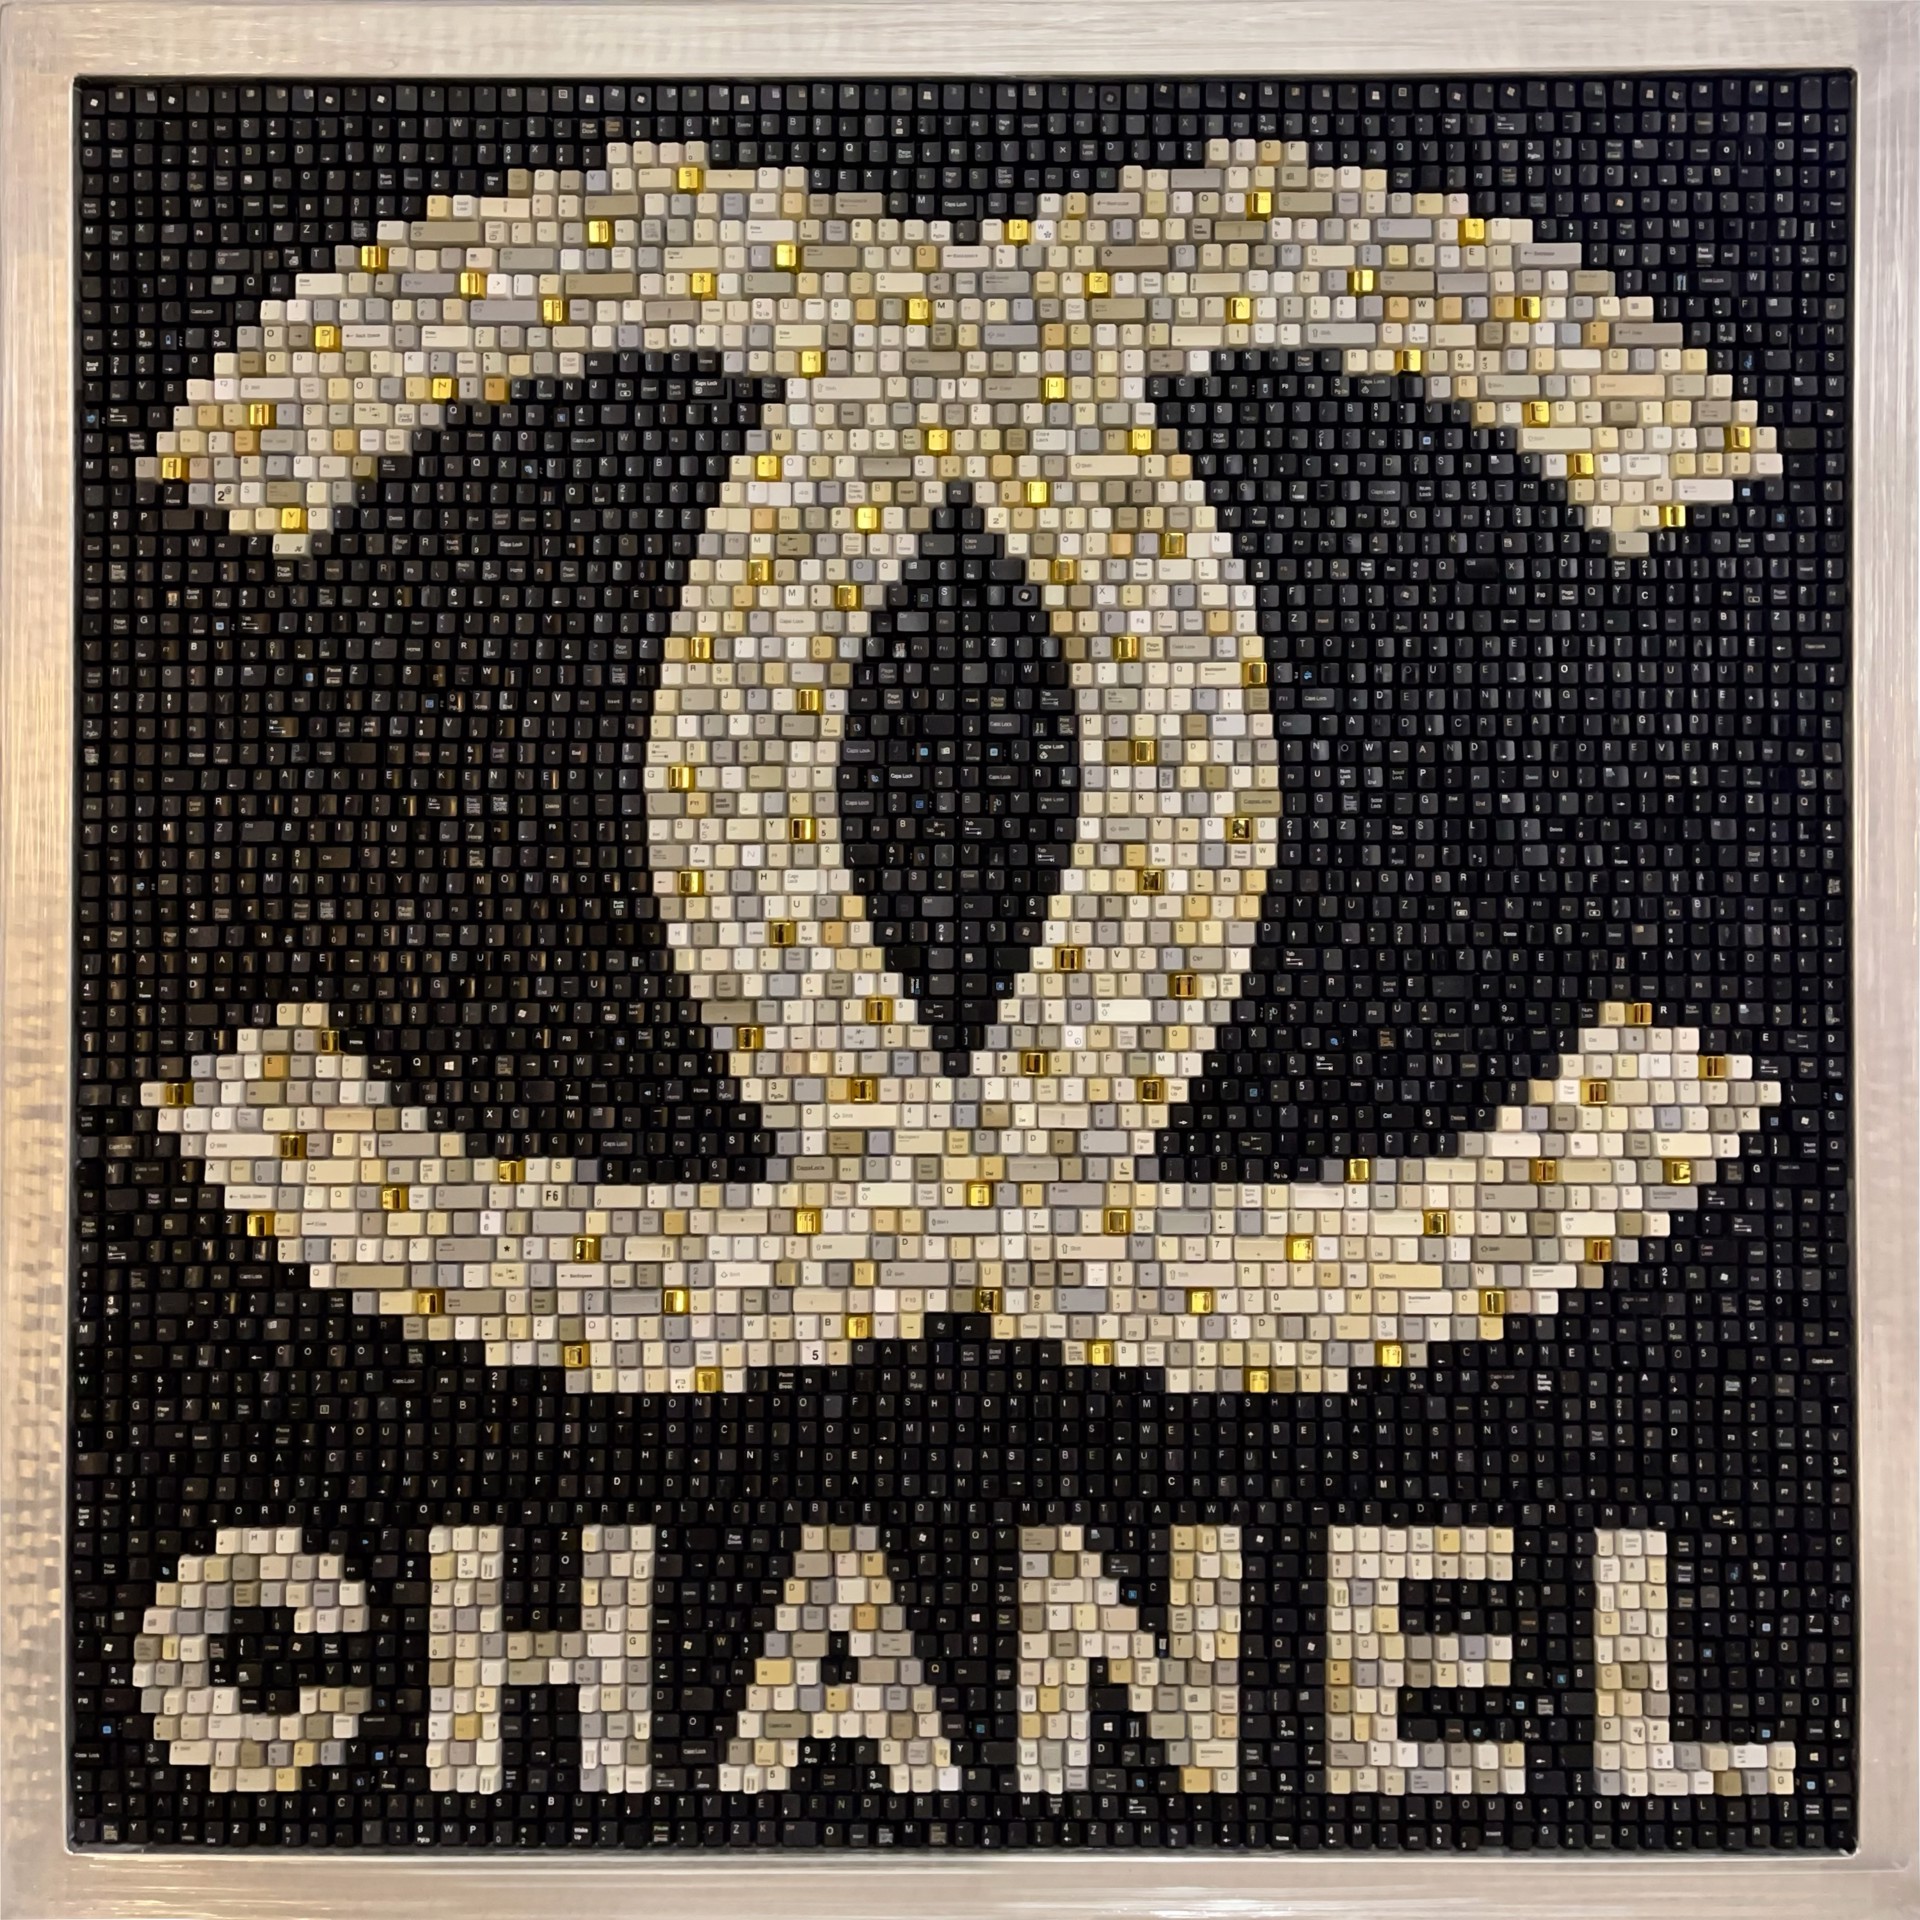 Chanel Now & Forever by Doug Powell